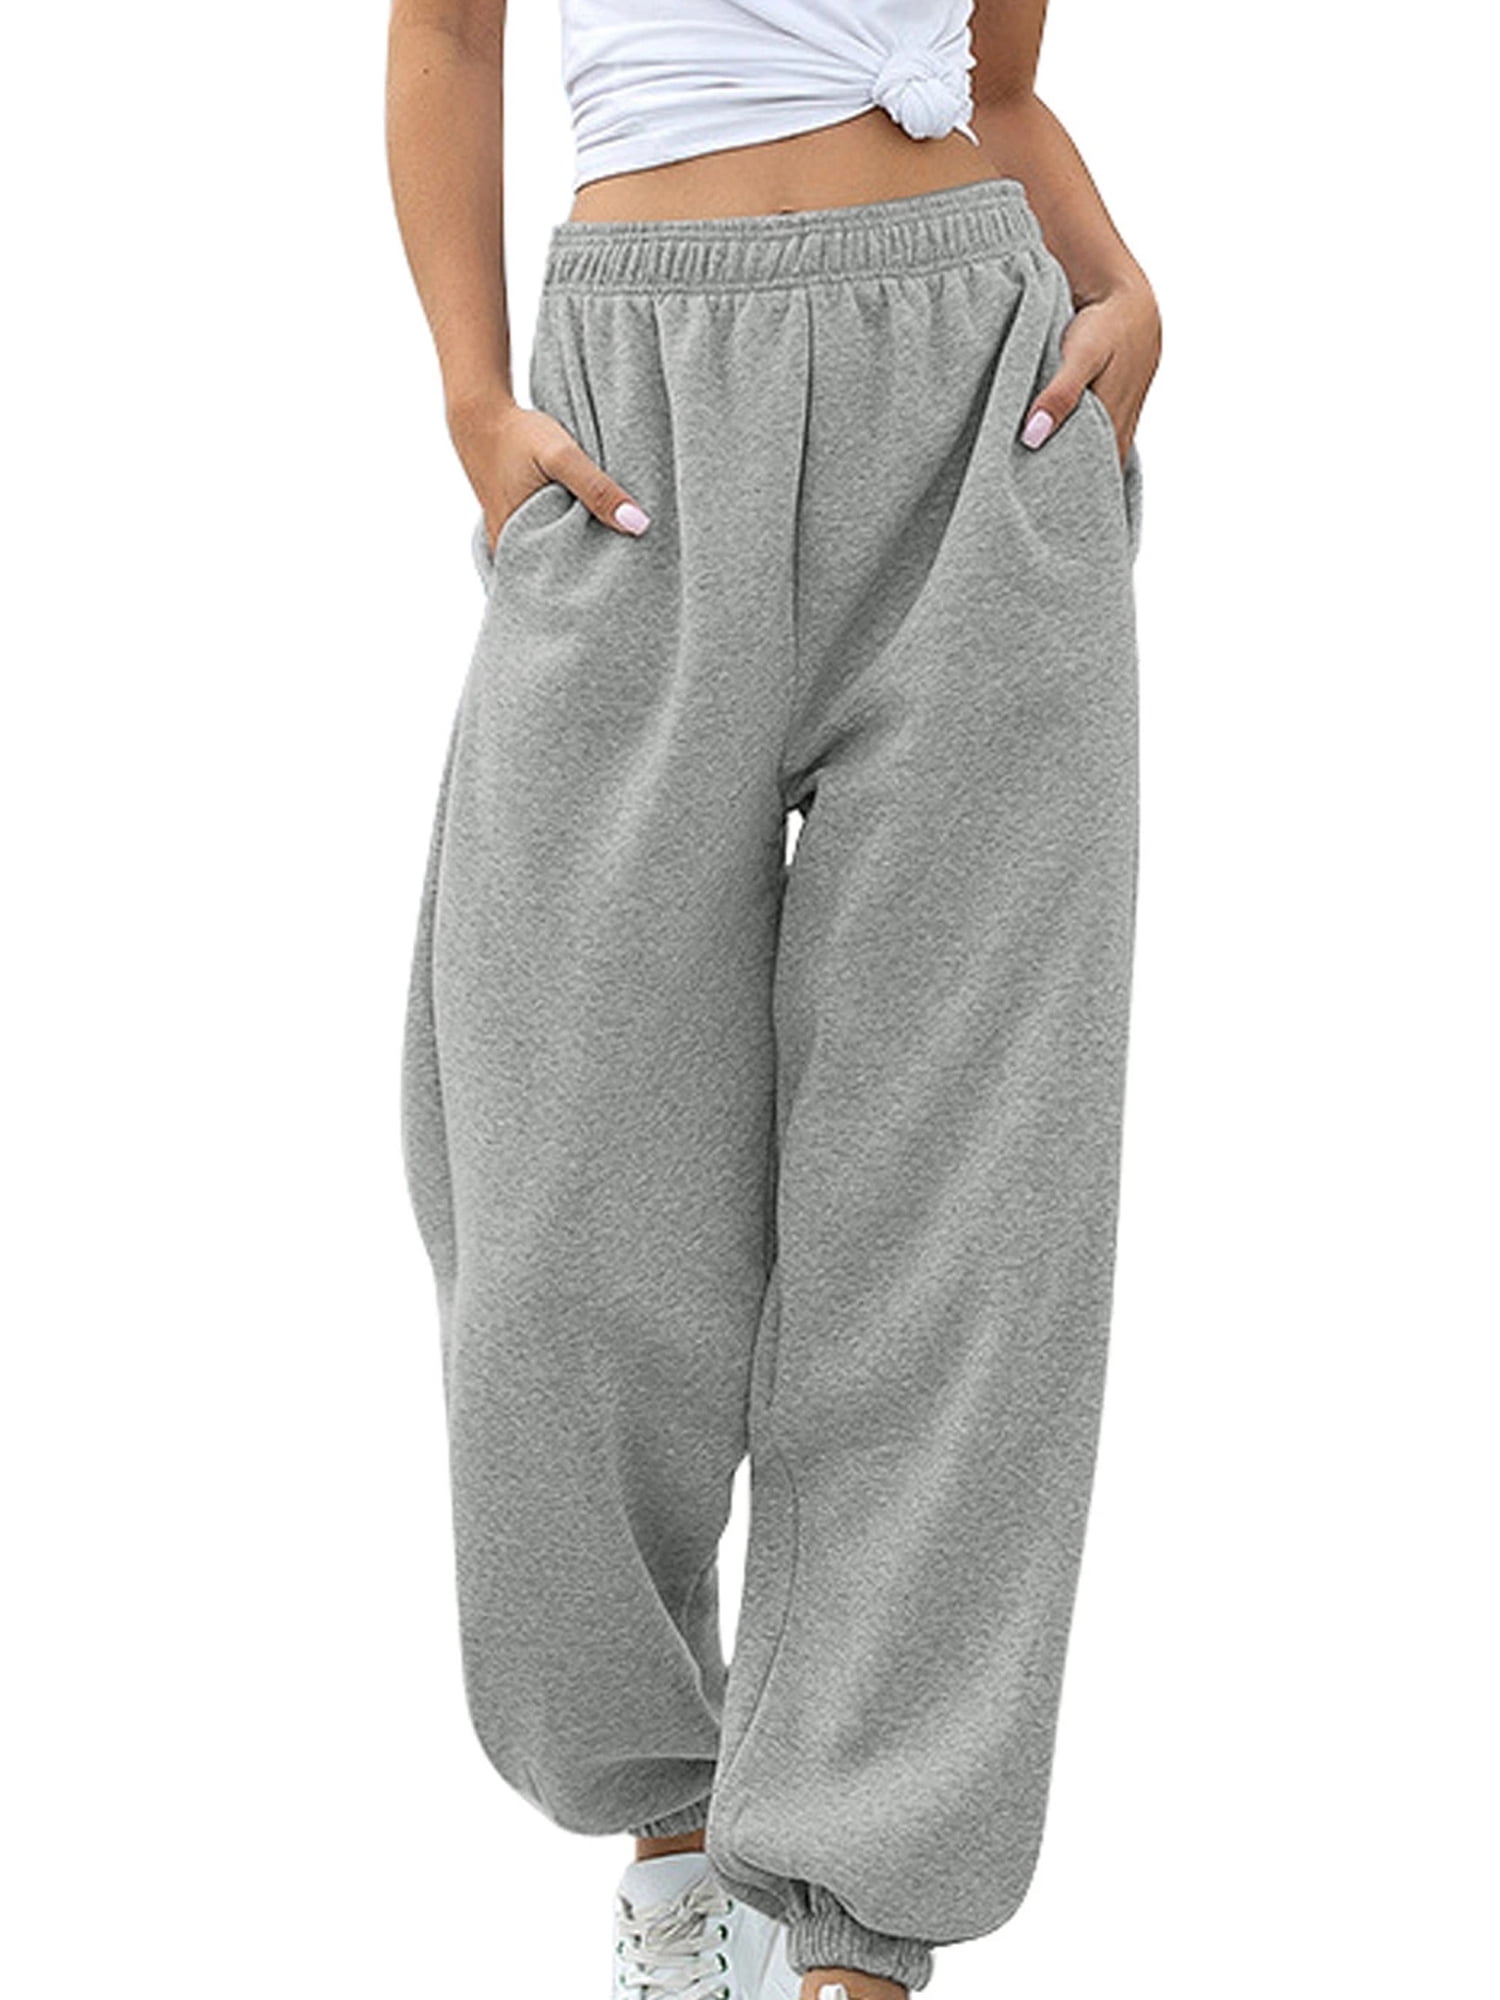 Houmous Womens Cotton Joggers Loose Pants Drawstring Sweatpants with 4 Pockets